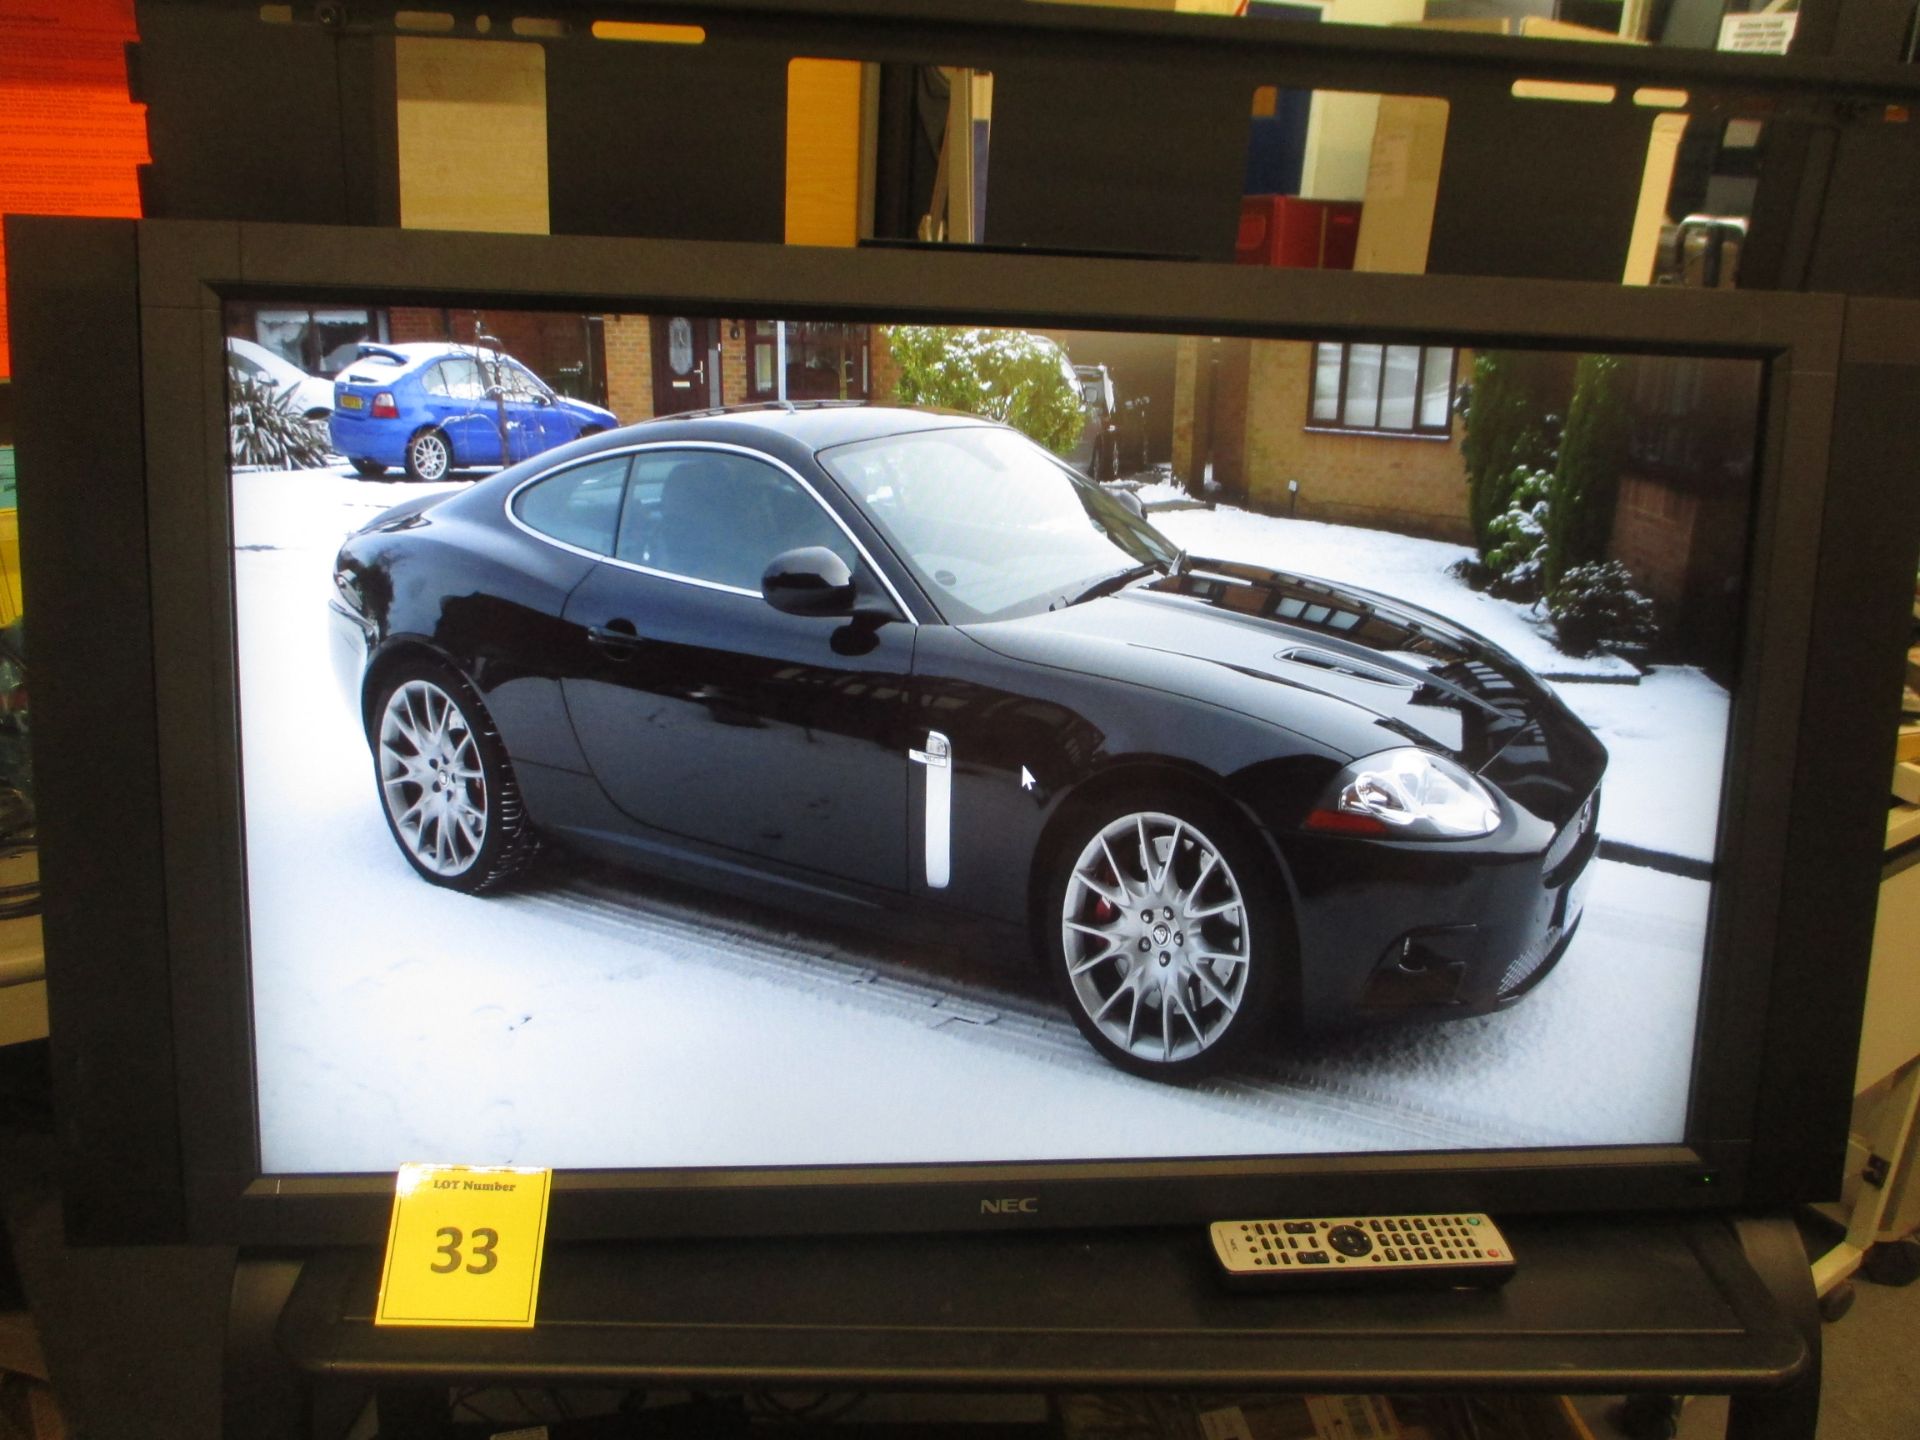 NEC 42"" MULTISYNC V422 LCD MONITOR. L42OUA WITH SPEAKERS ATTACHED (MODEL NEC SP-4046PV) & REMOTE